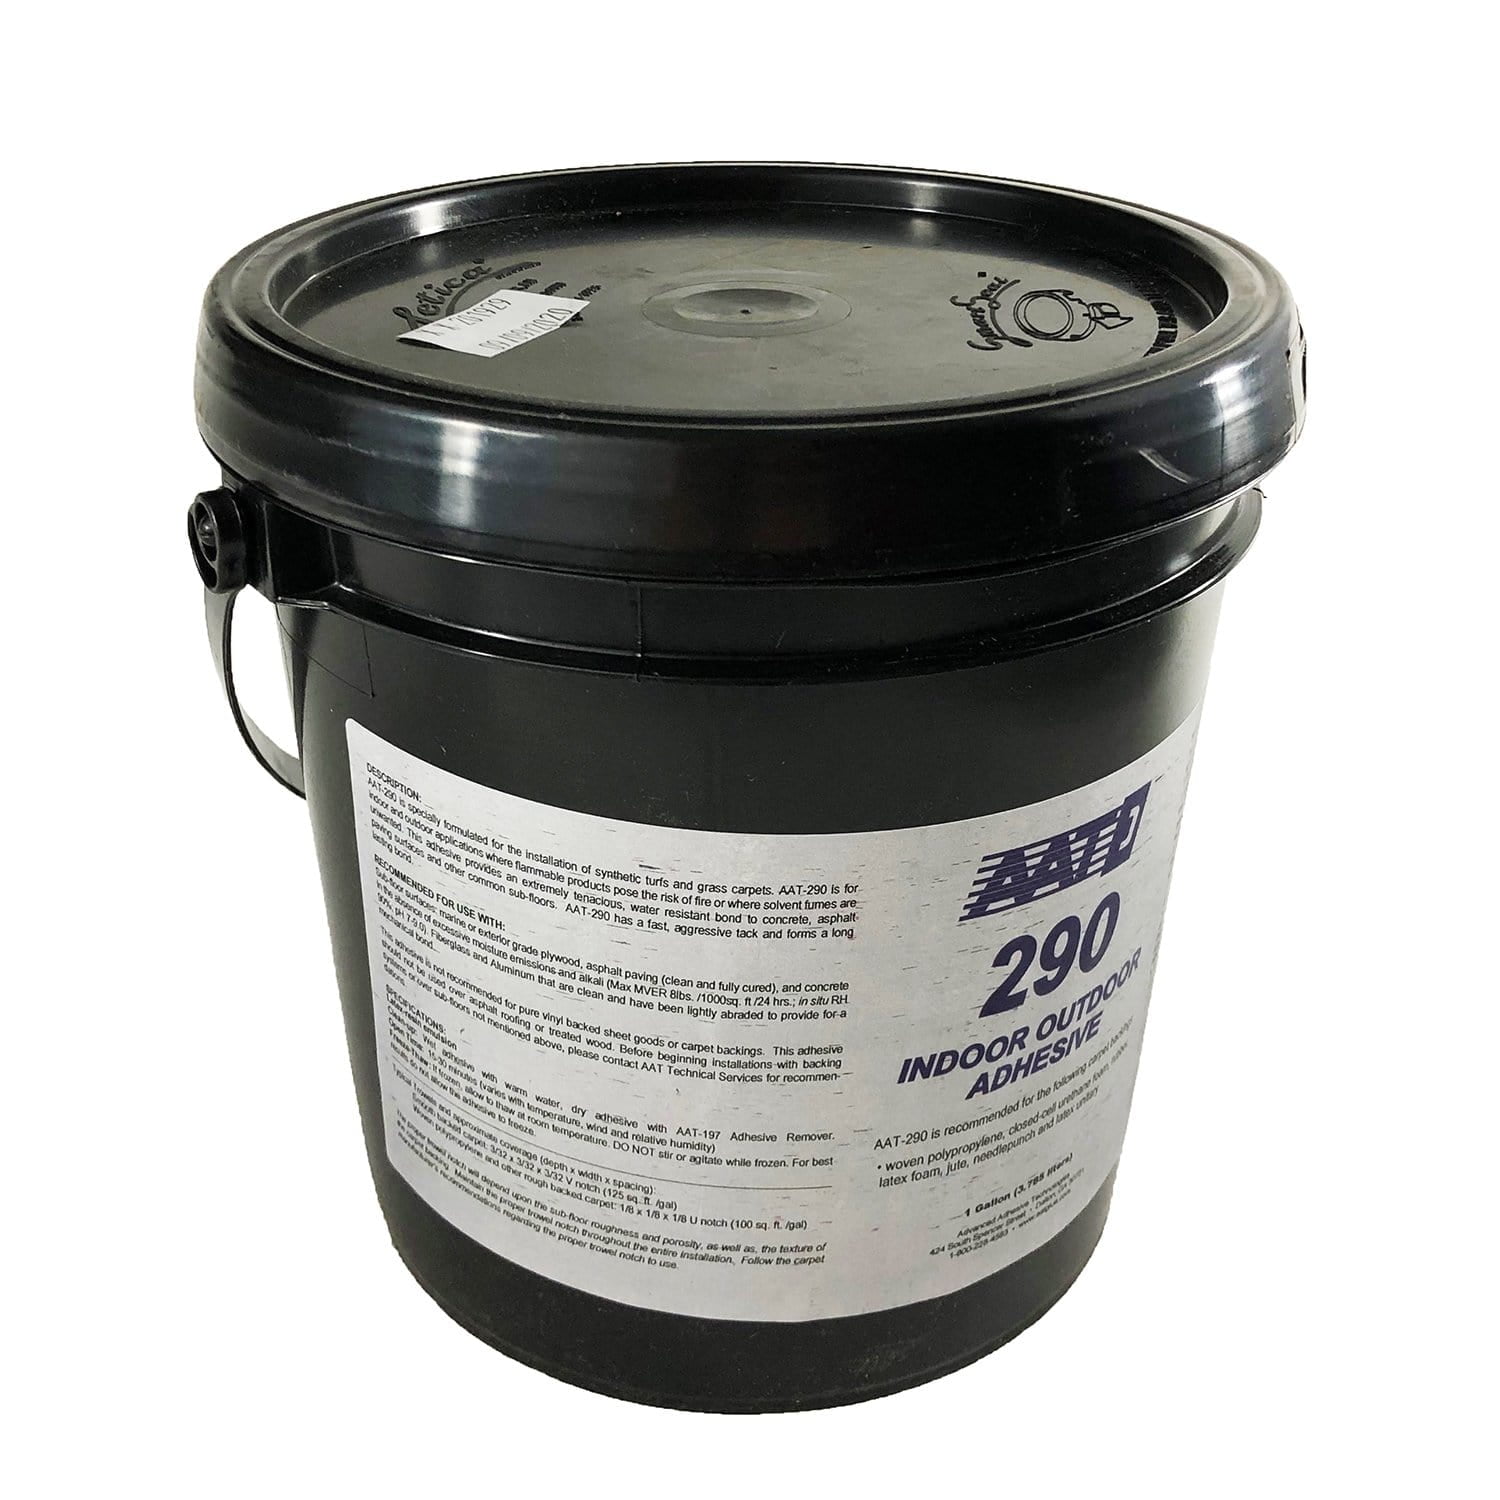 Eclectic E6000 Industrial Strength Solvent Based Adhesive Clear 5 gal Pail